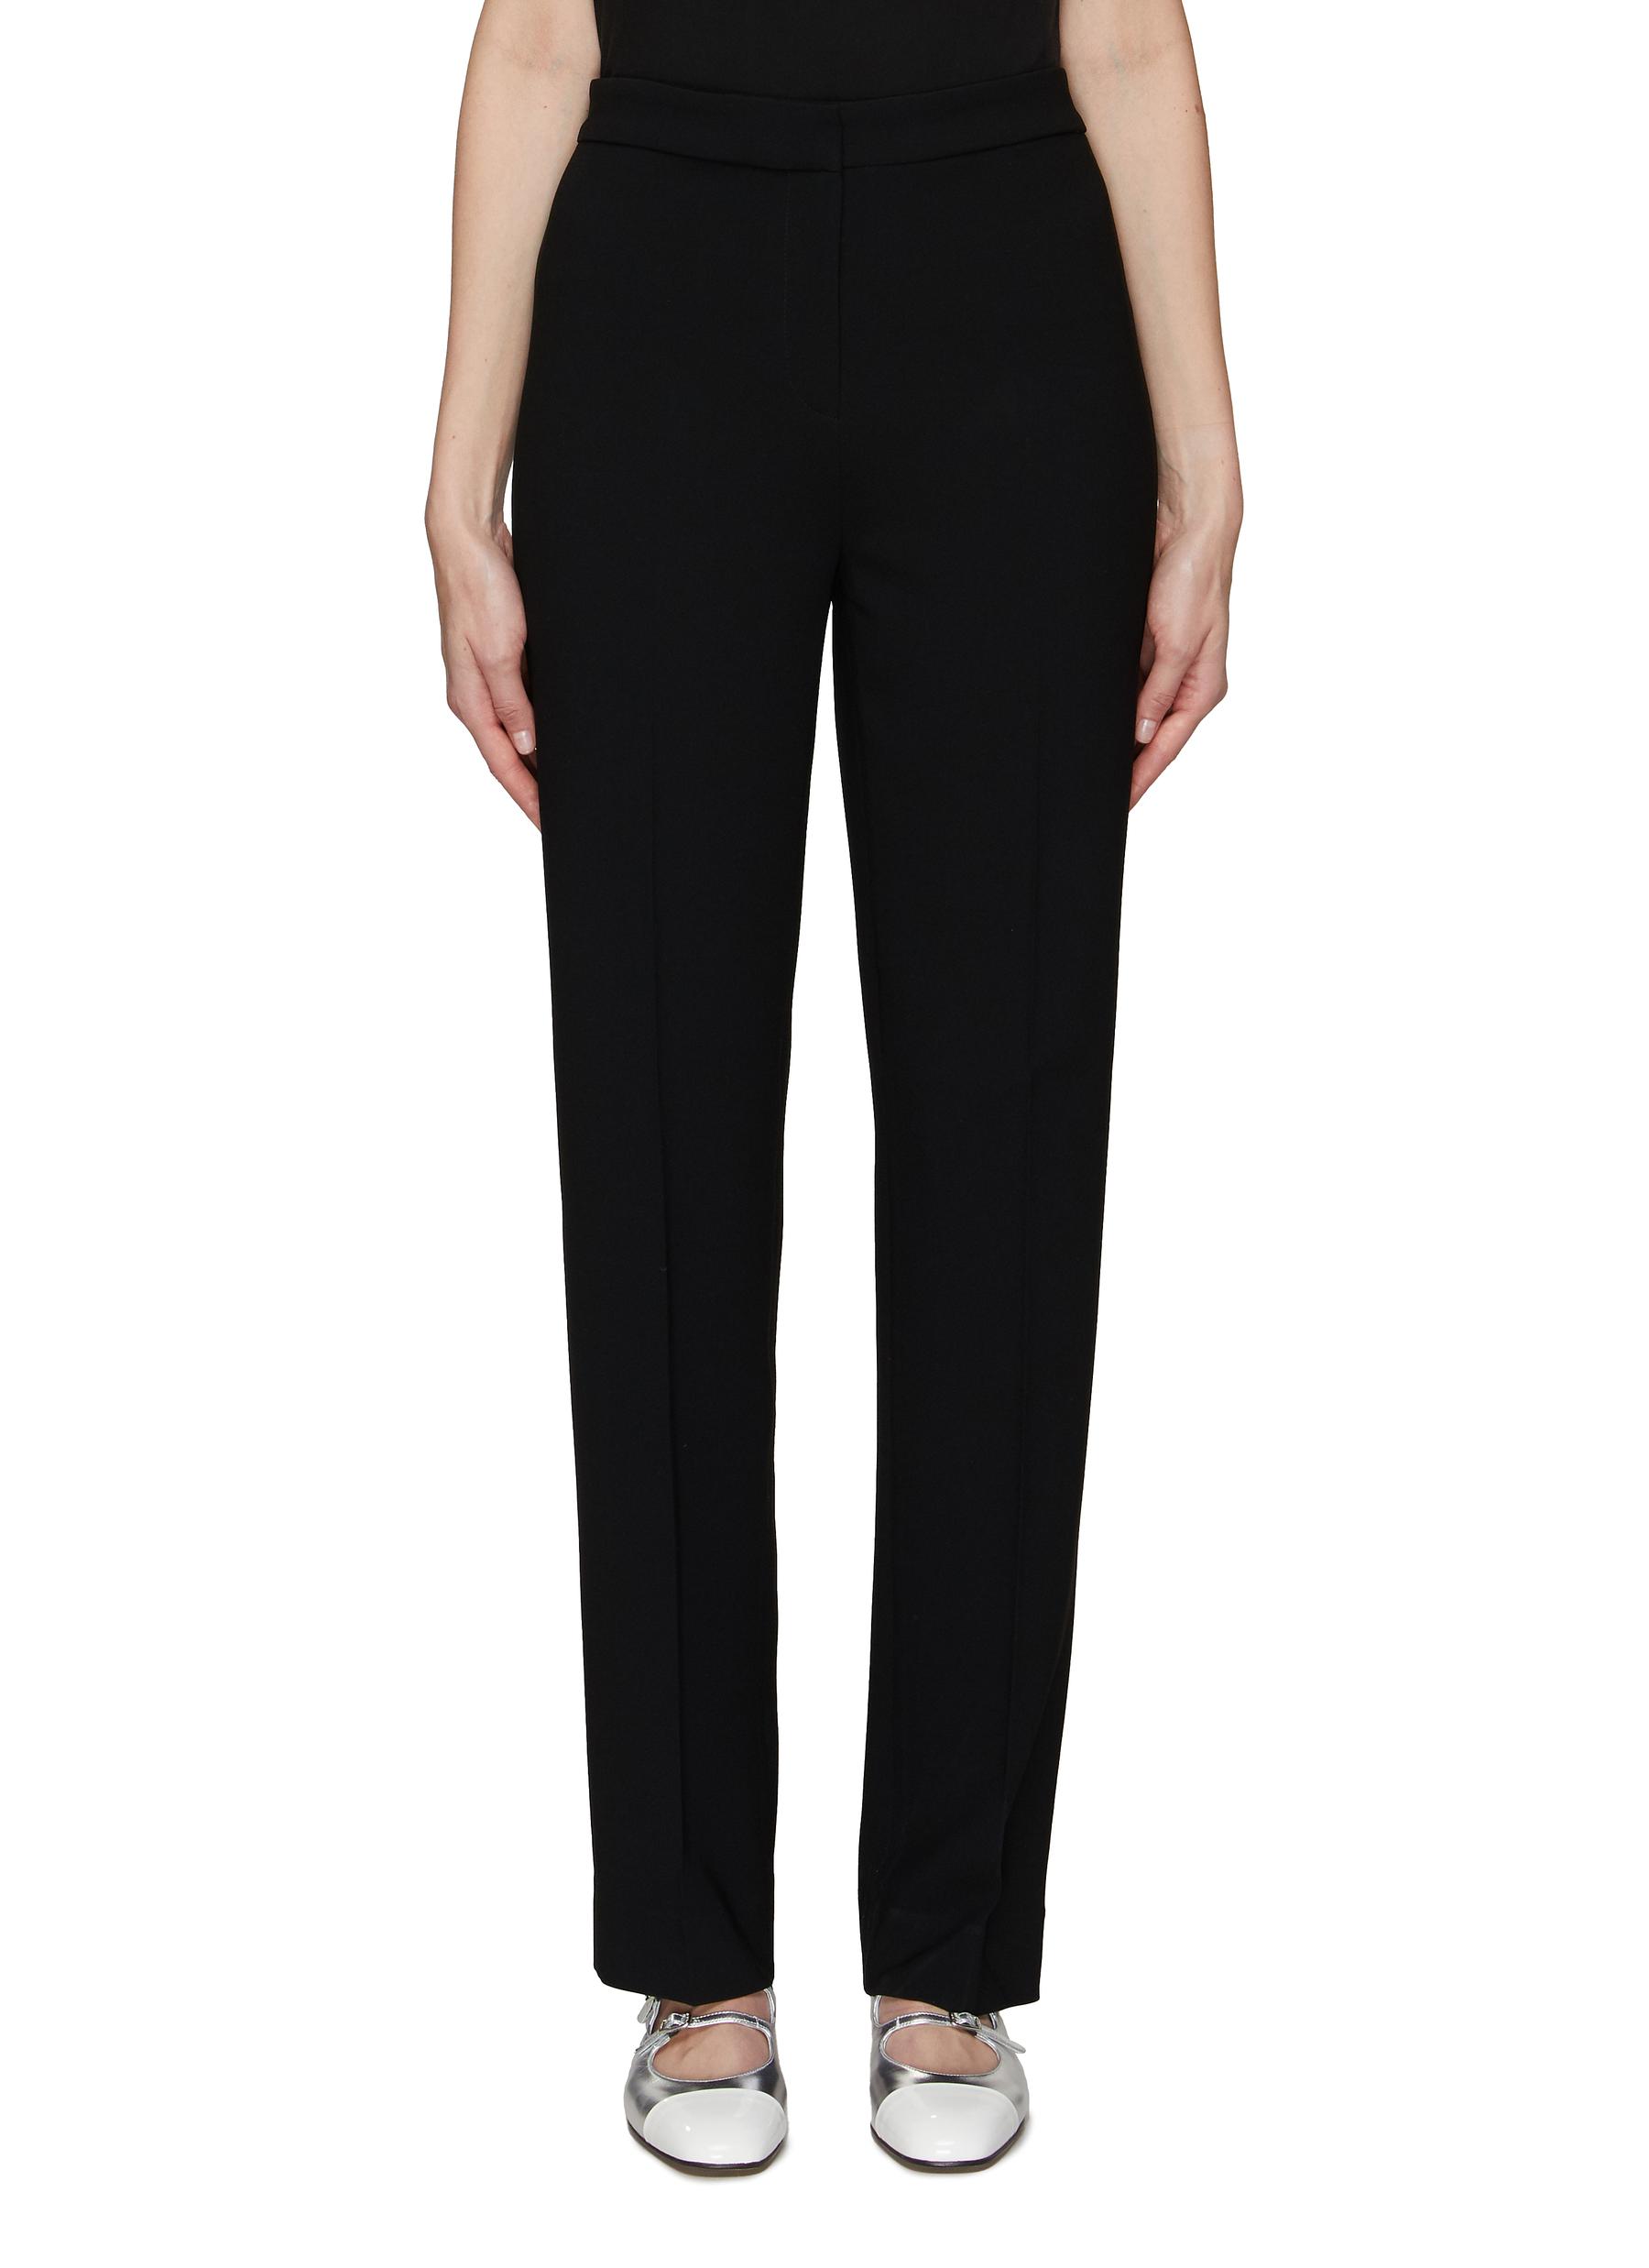 'Diana' Flat Front Pressed Crease Straight Leg Pants